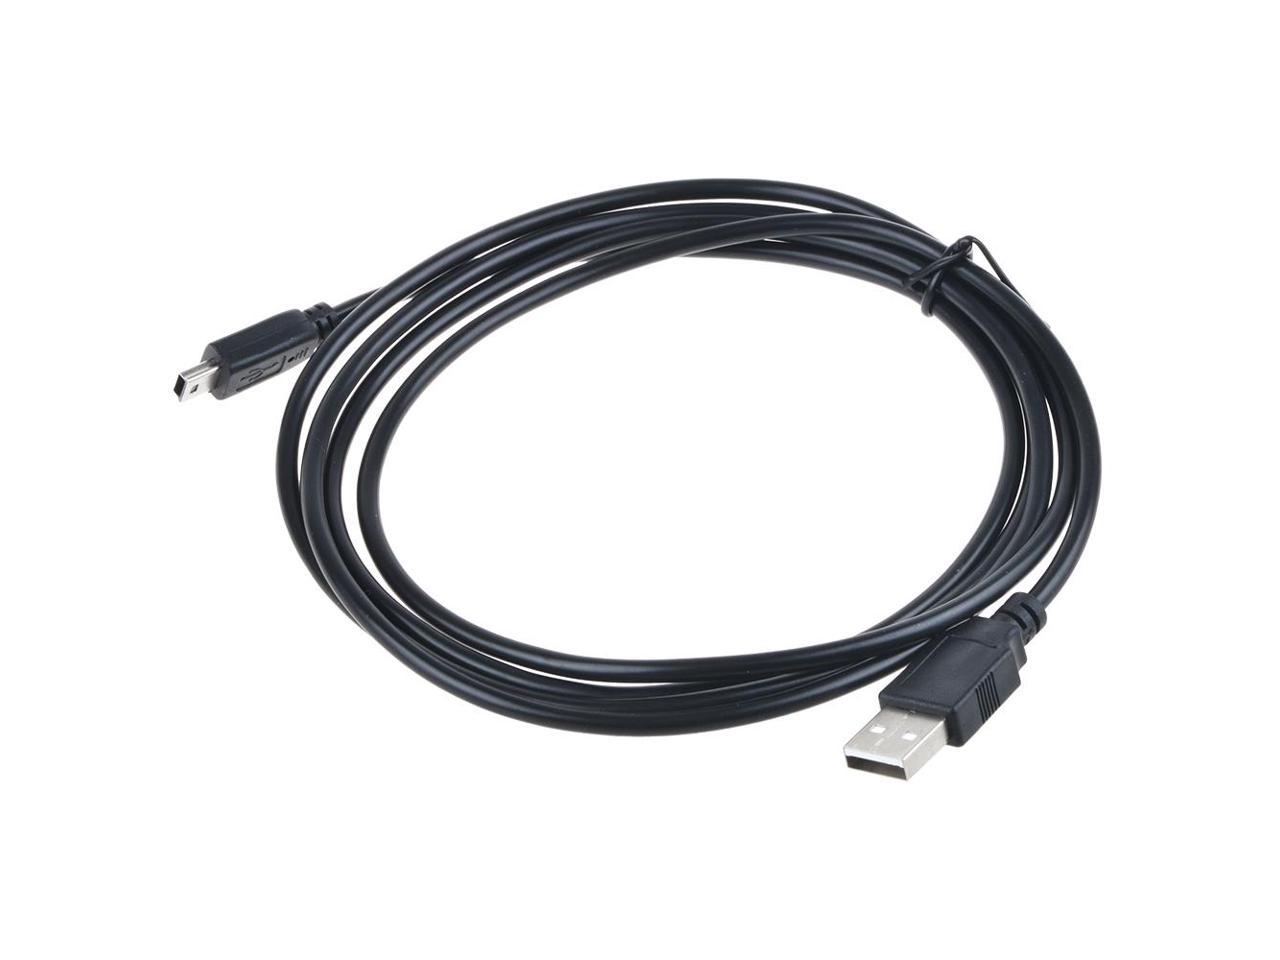 SSSR USB Data Sync Cable Cord for Supersonic SC-74JB SC-72JB SC-91JB SC-90JB SC-91MID SC-72MID SC90MID Android WiFi Tablet PC 